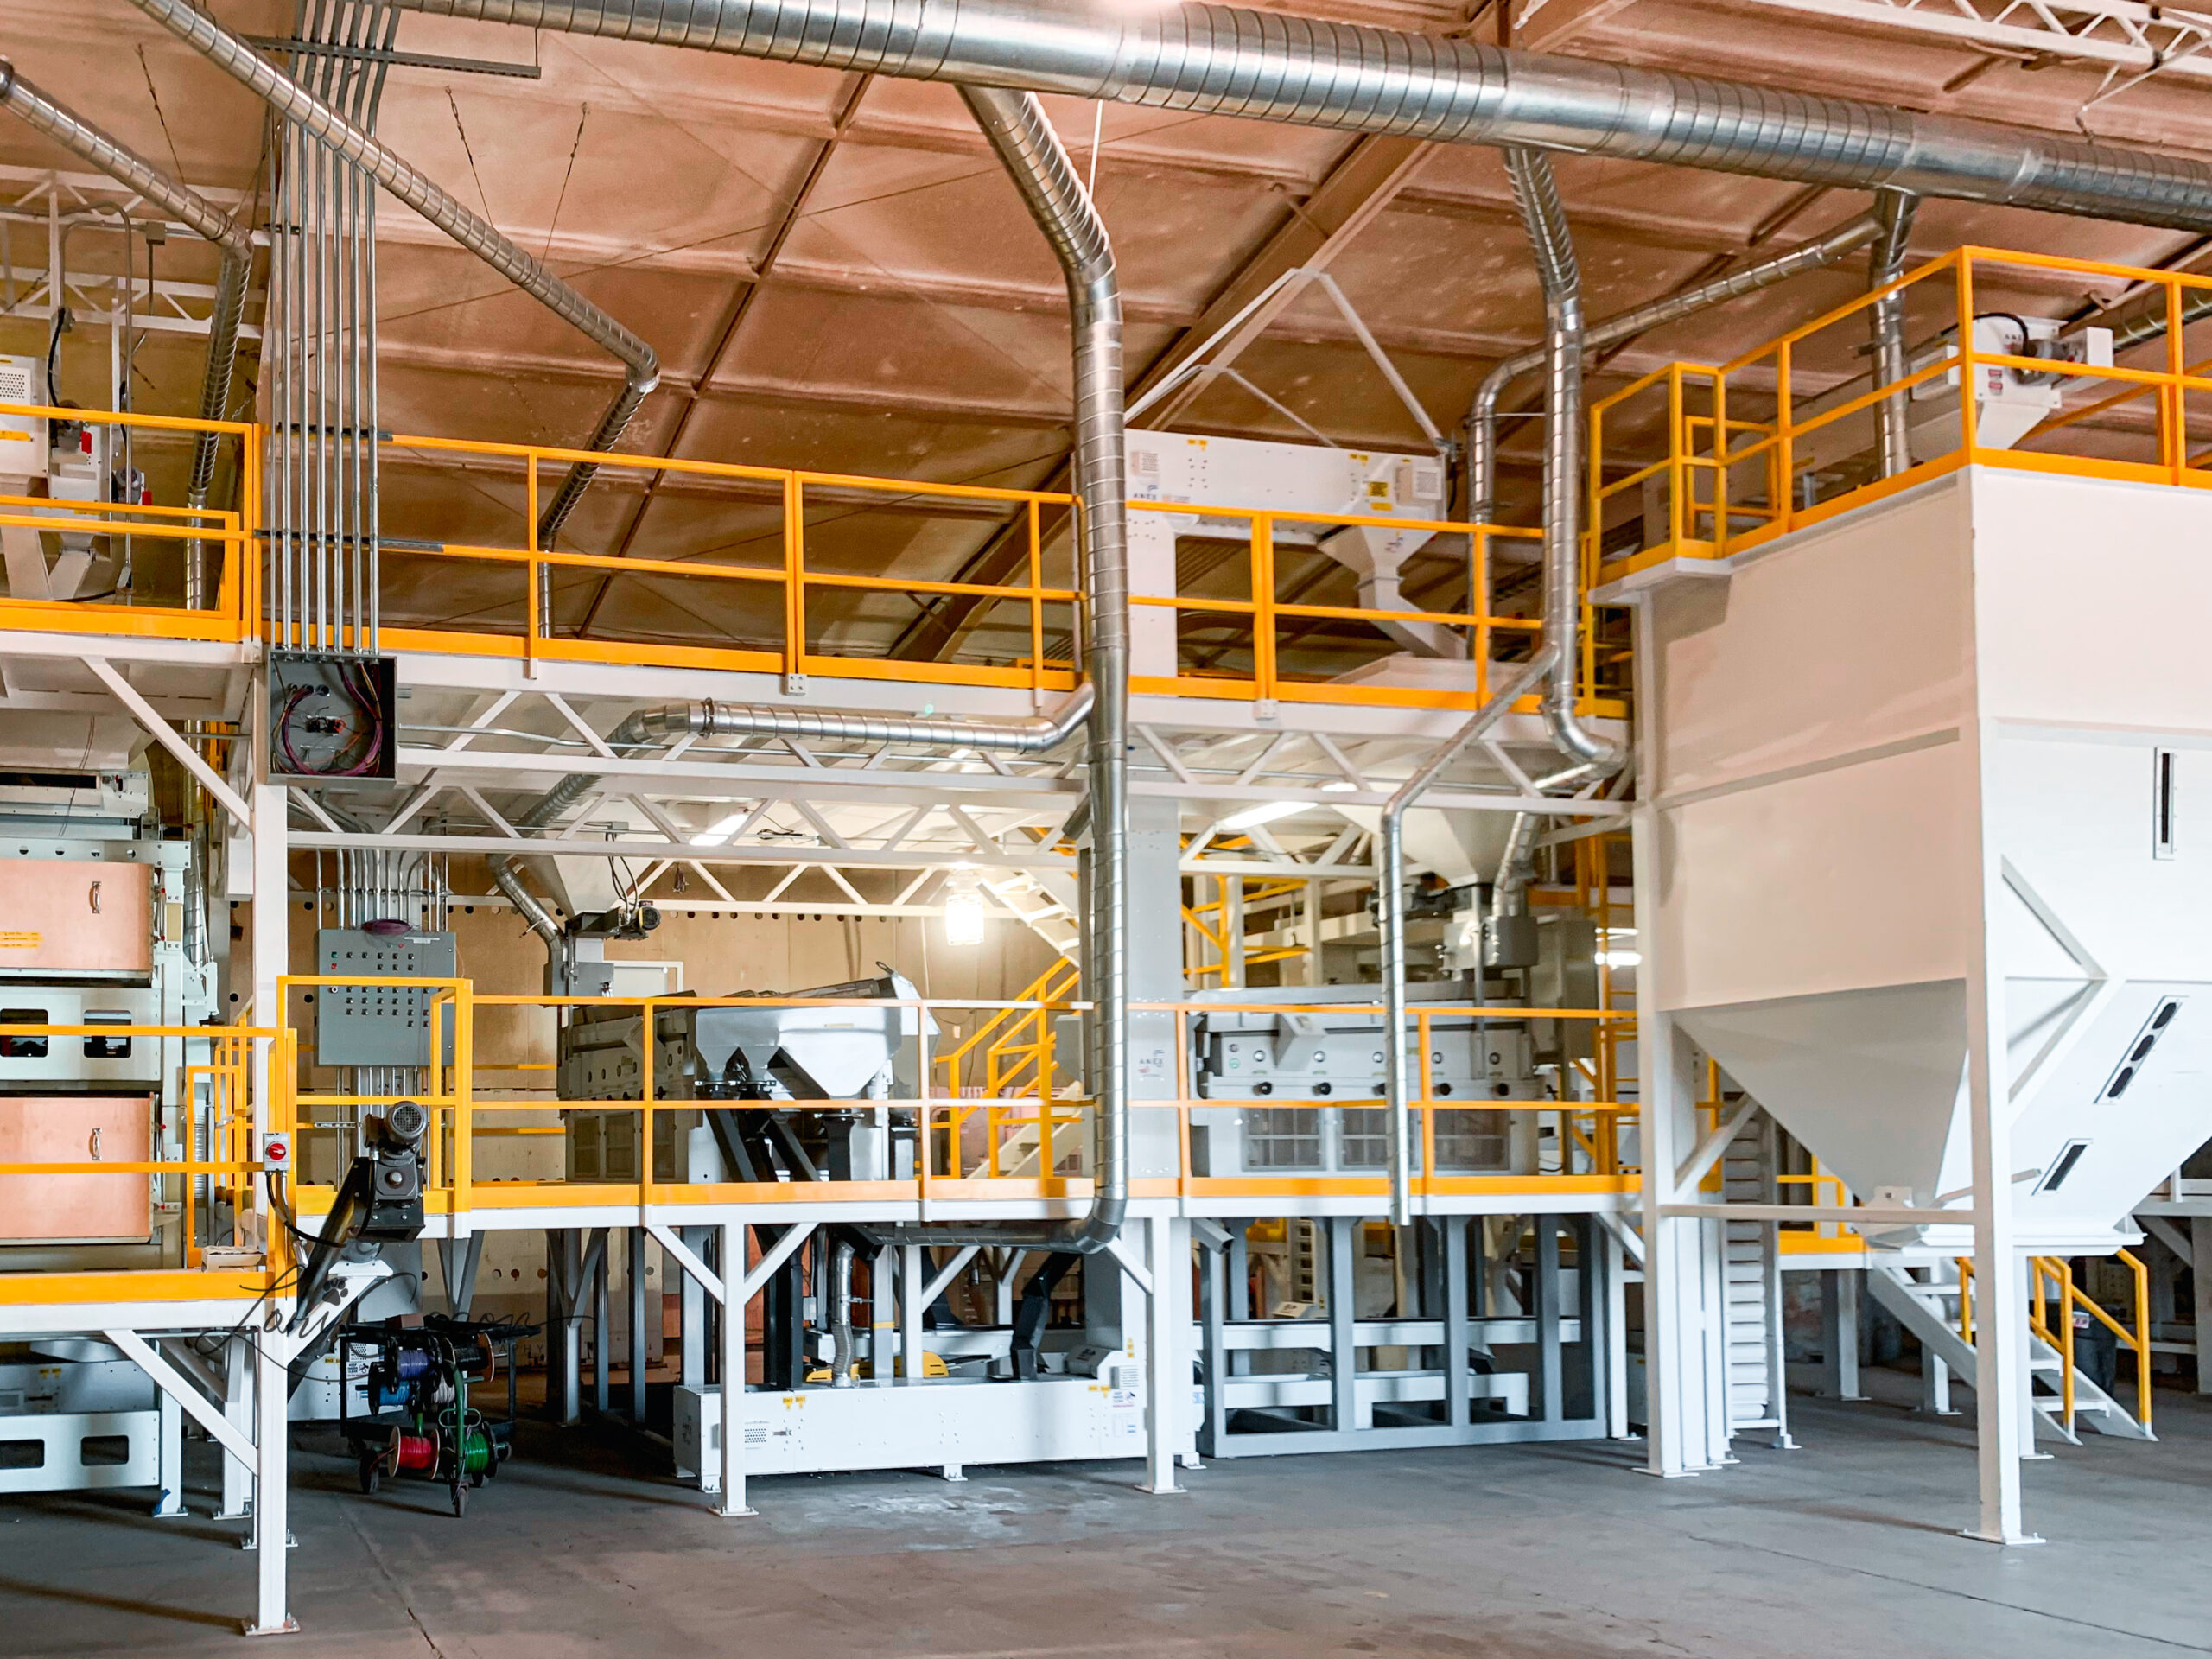 Pea Processing Plant Design, Fabrication and Equipment Installation in Washington